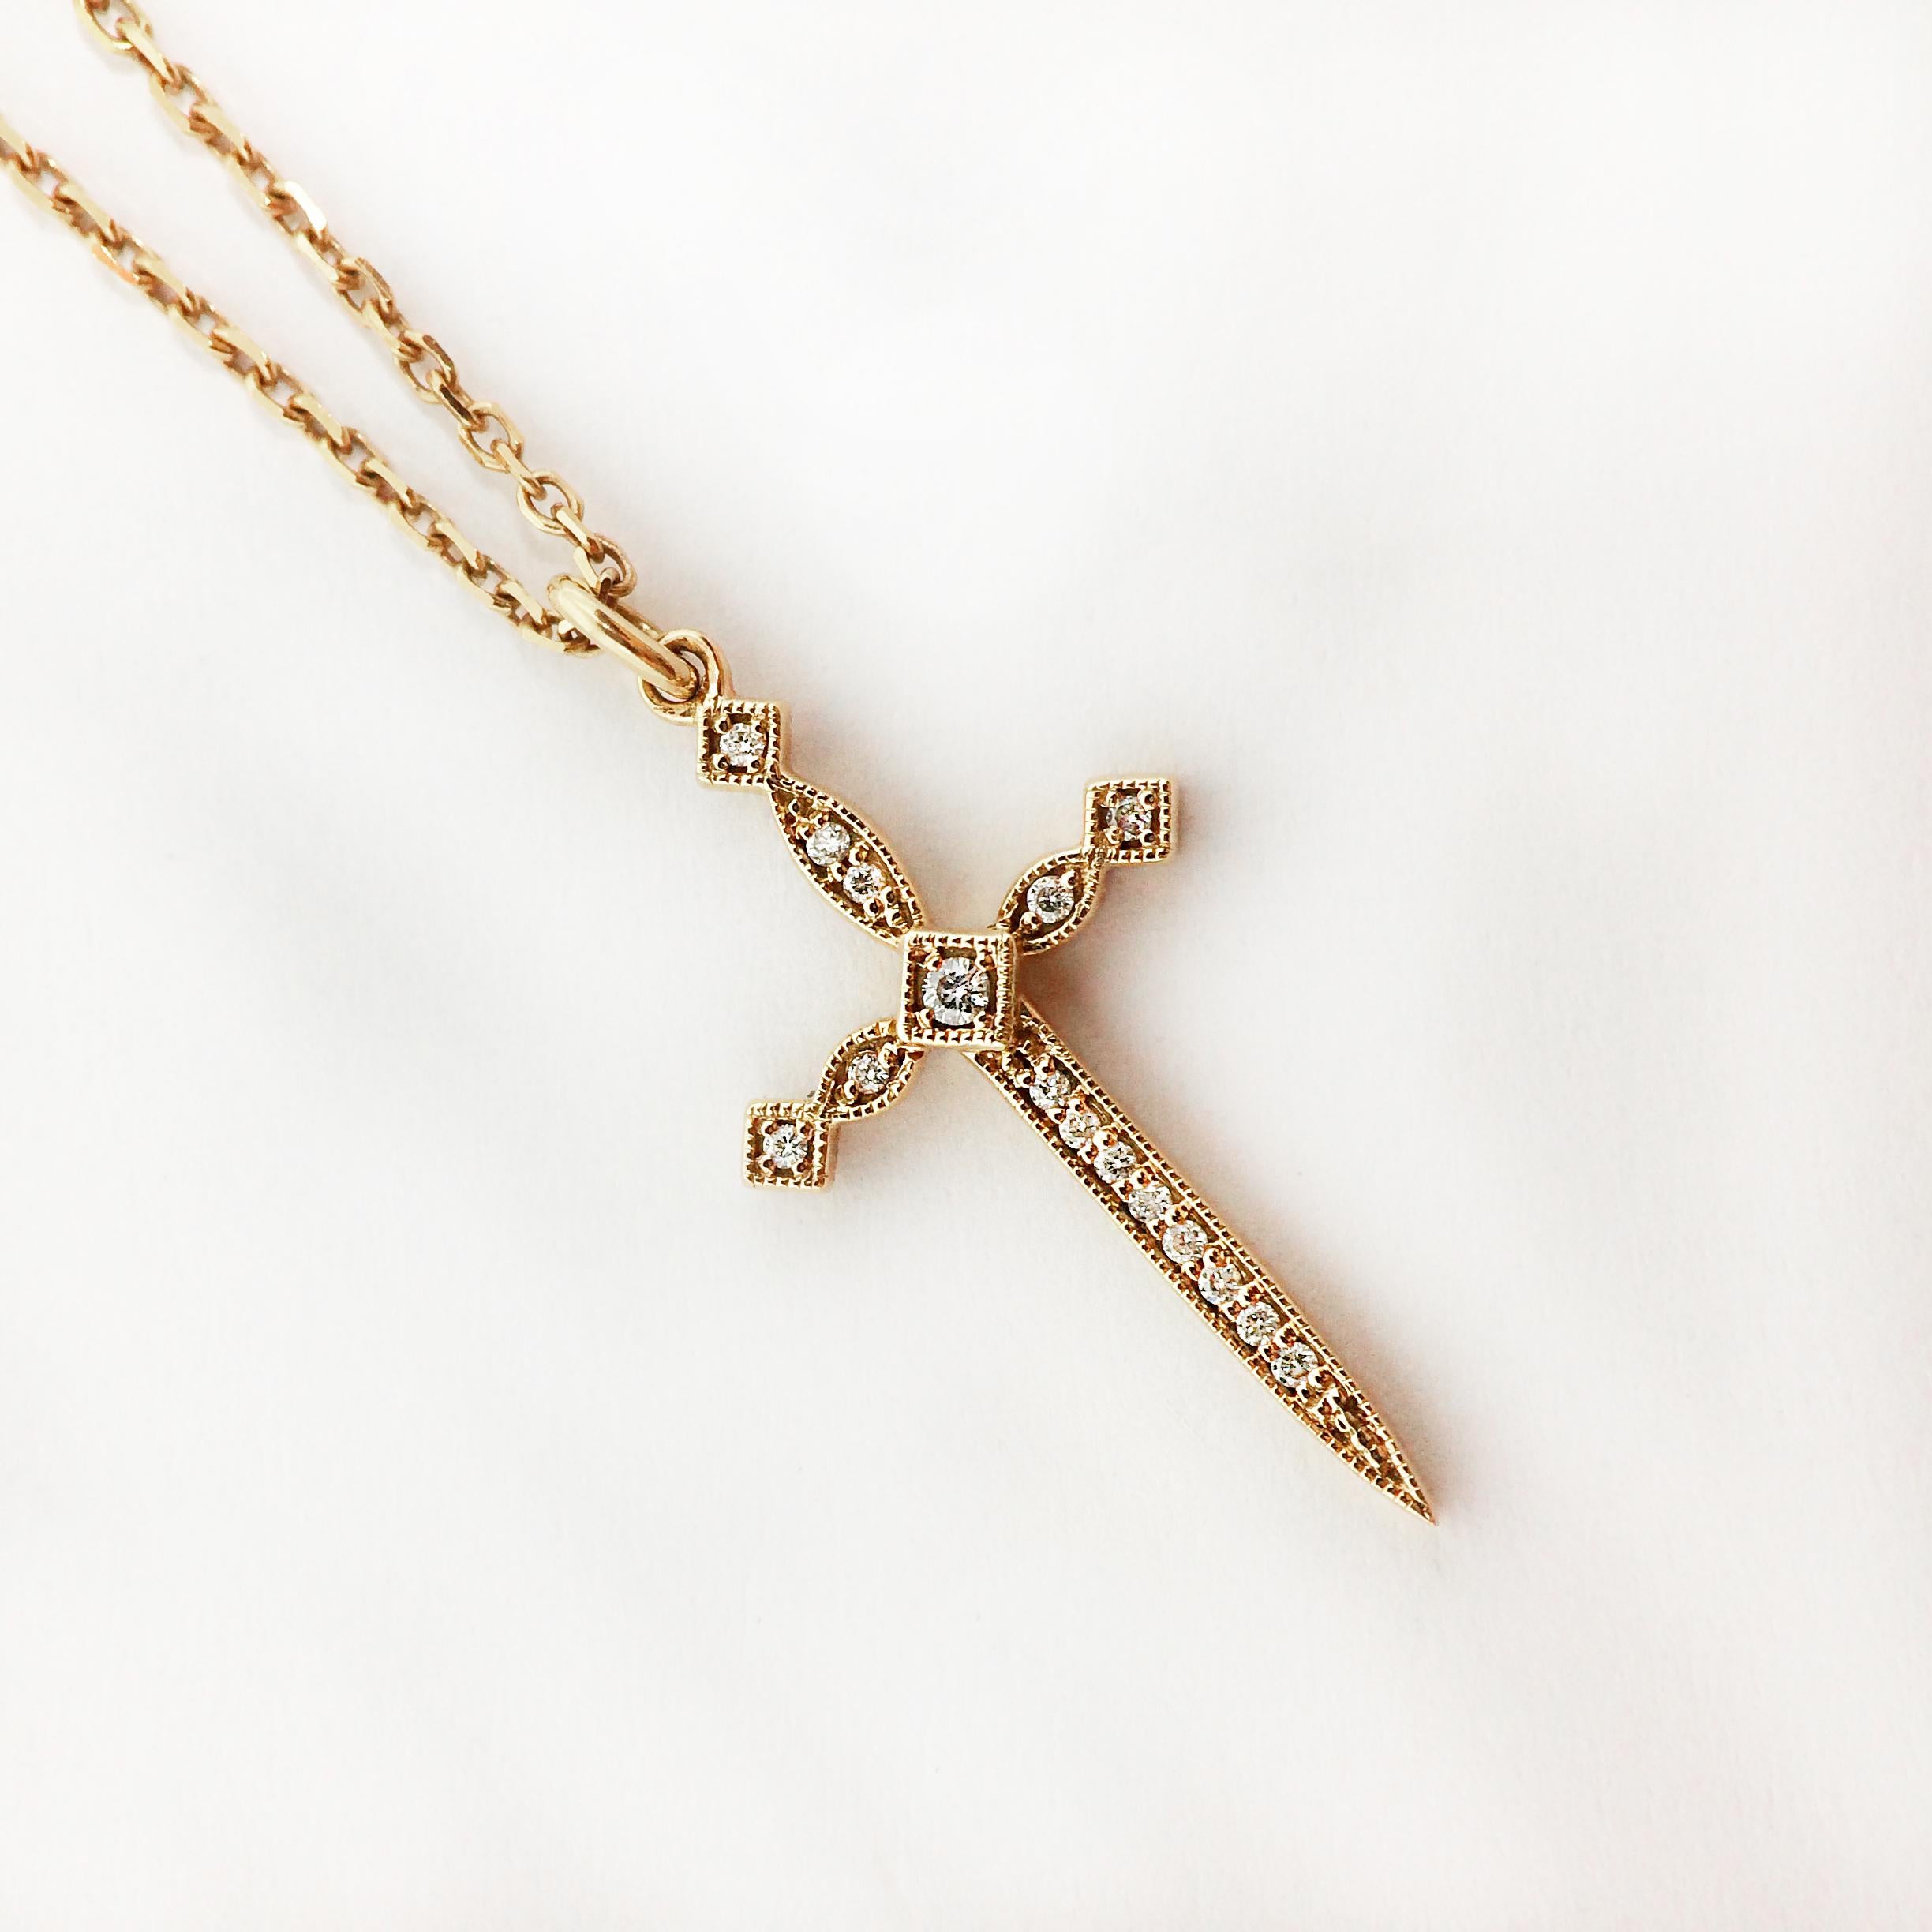 By Stone Paris

Pendant necklace
18-kt pink gold 2.53g
16 GVS white diamonds 0.05 ct
Size of the pattern : 1.1 x 2.06 cm
Adjustable length from 40 to 42 cm

This piece is unavailable, it has to be especially handmade with an 8 to 10 weeks lead time.